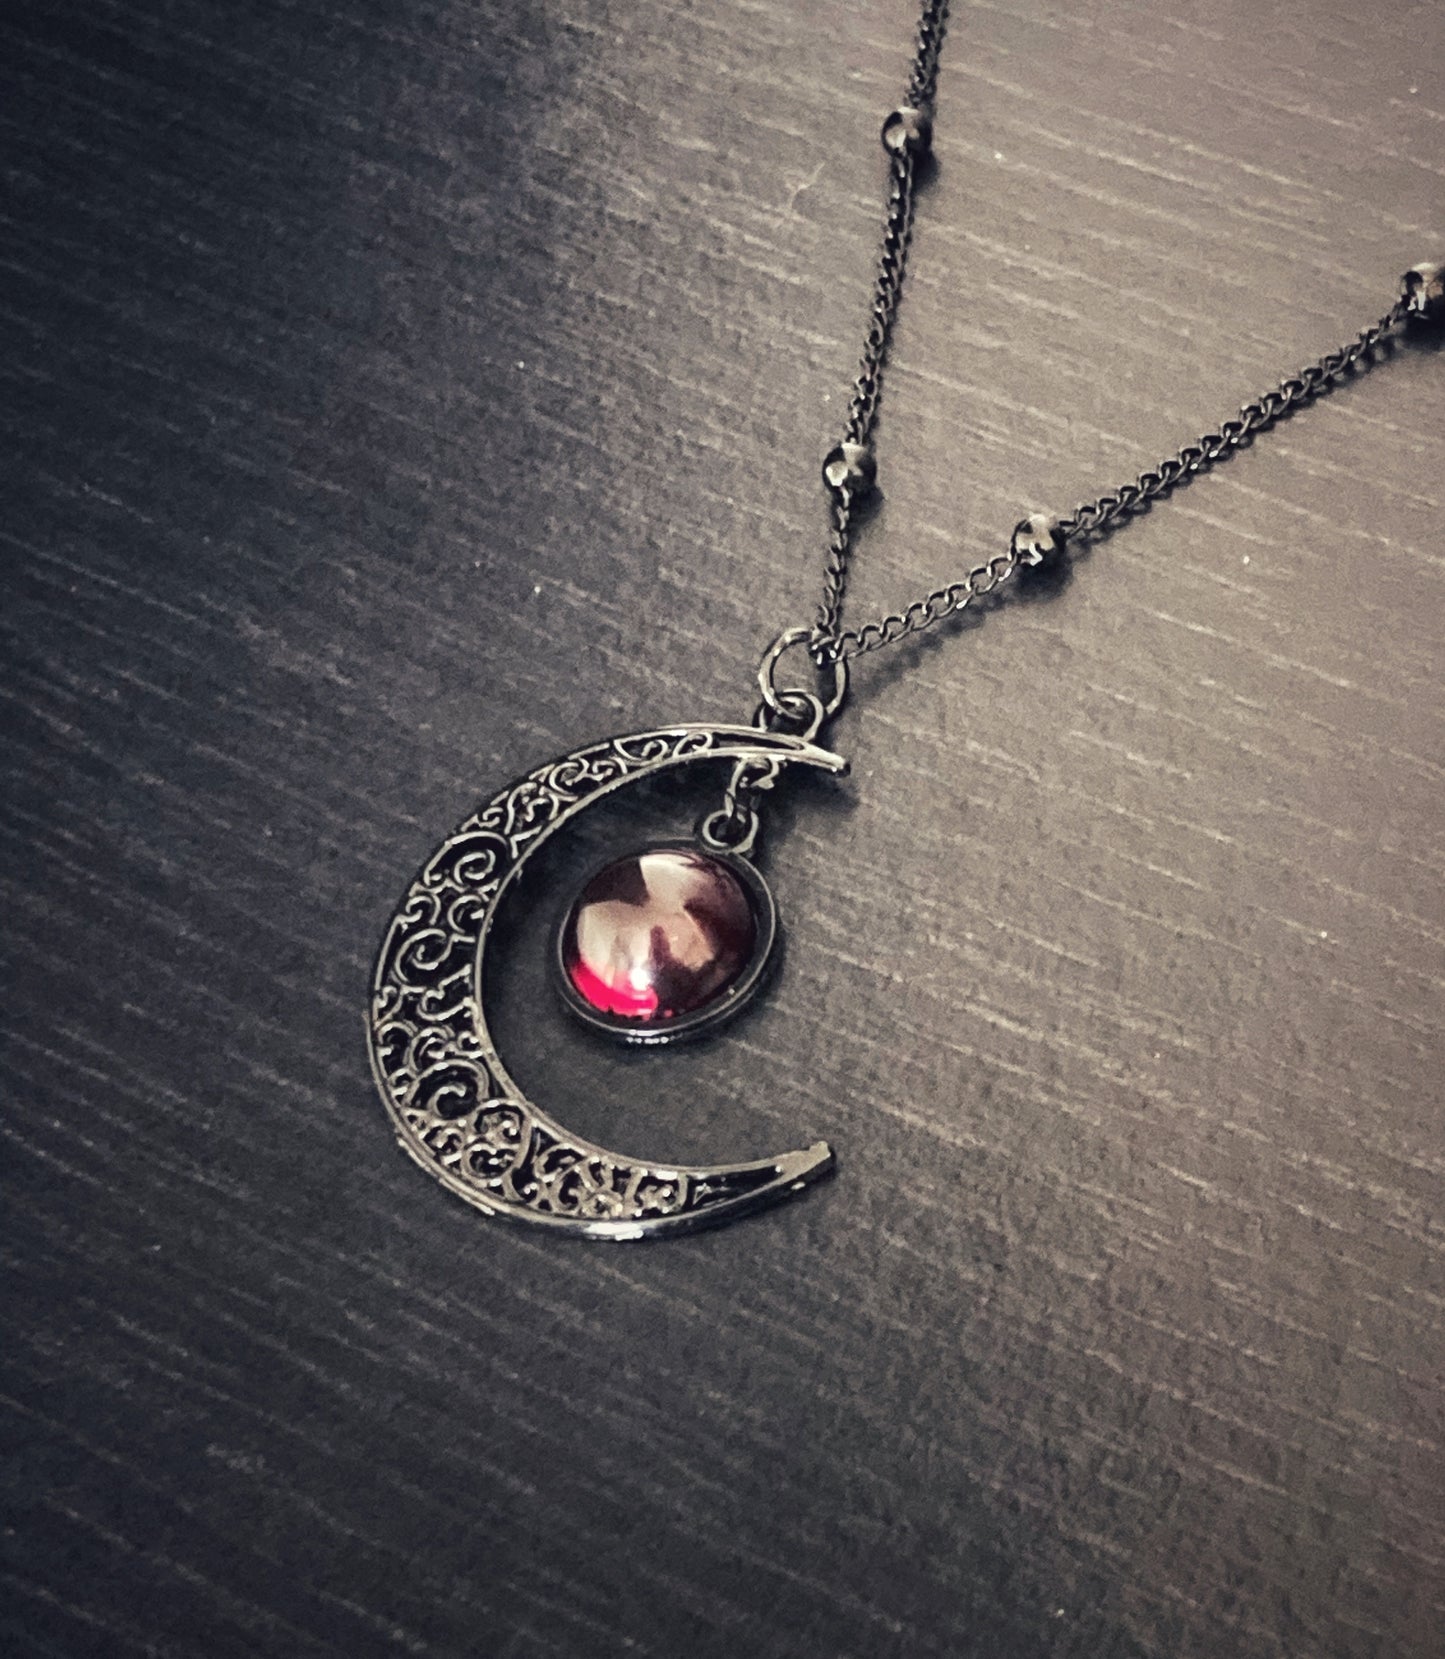 A gothic looking crescent moon pendant is sitting at an angle. You can see the narrow link chain attached to it and both are black. There is a dome shaped red glass looking stone hanging from the moon into the curve that glistens in the light.